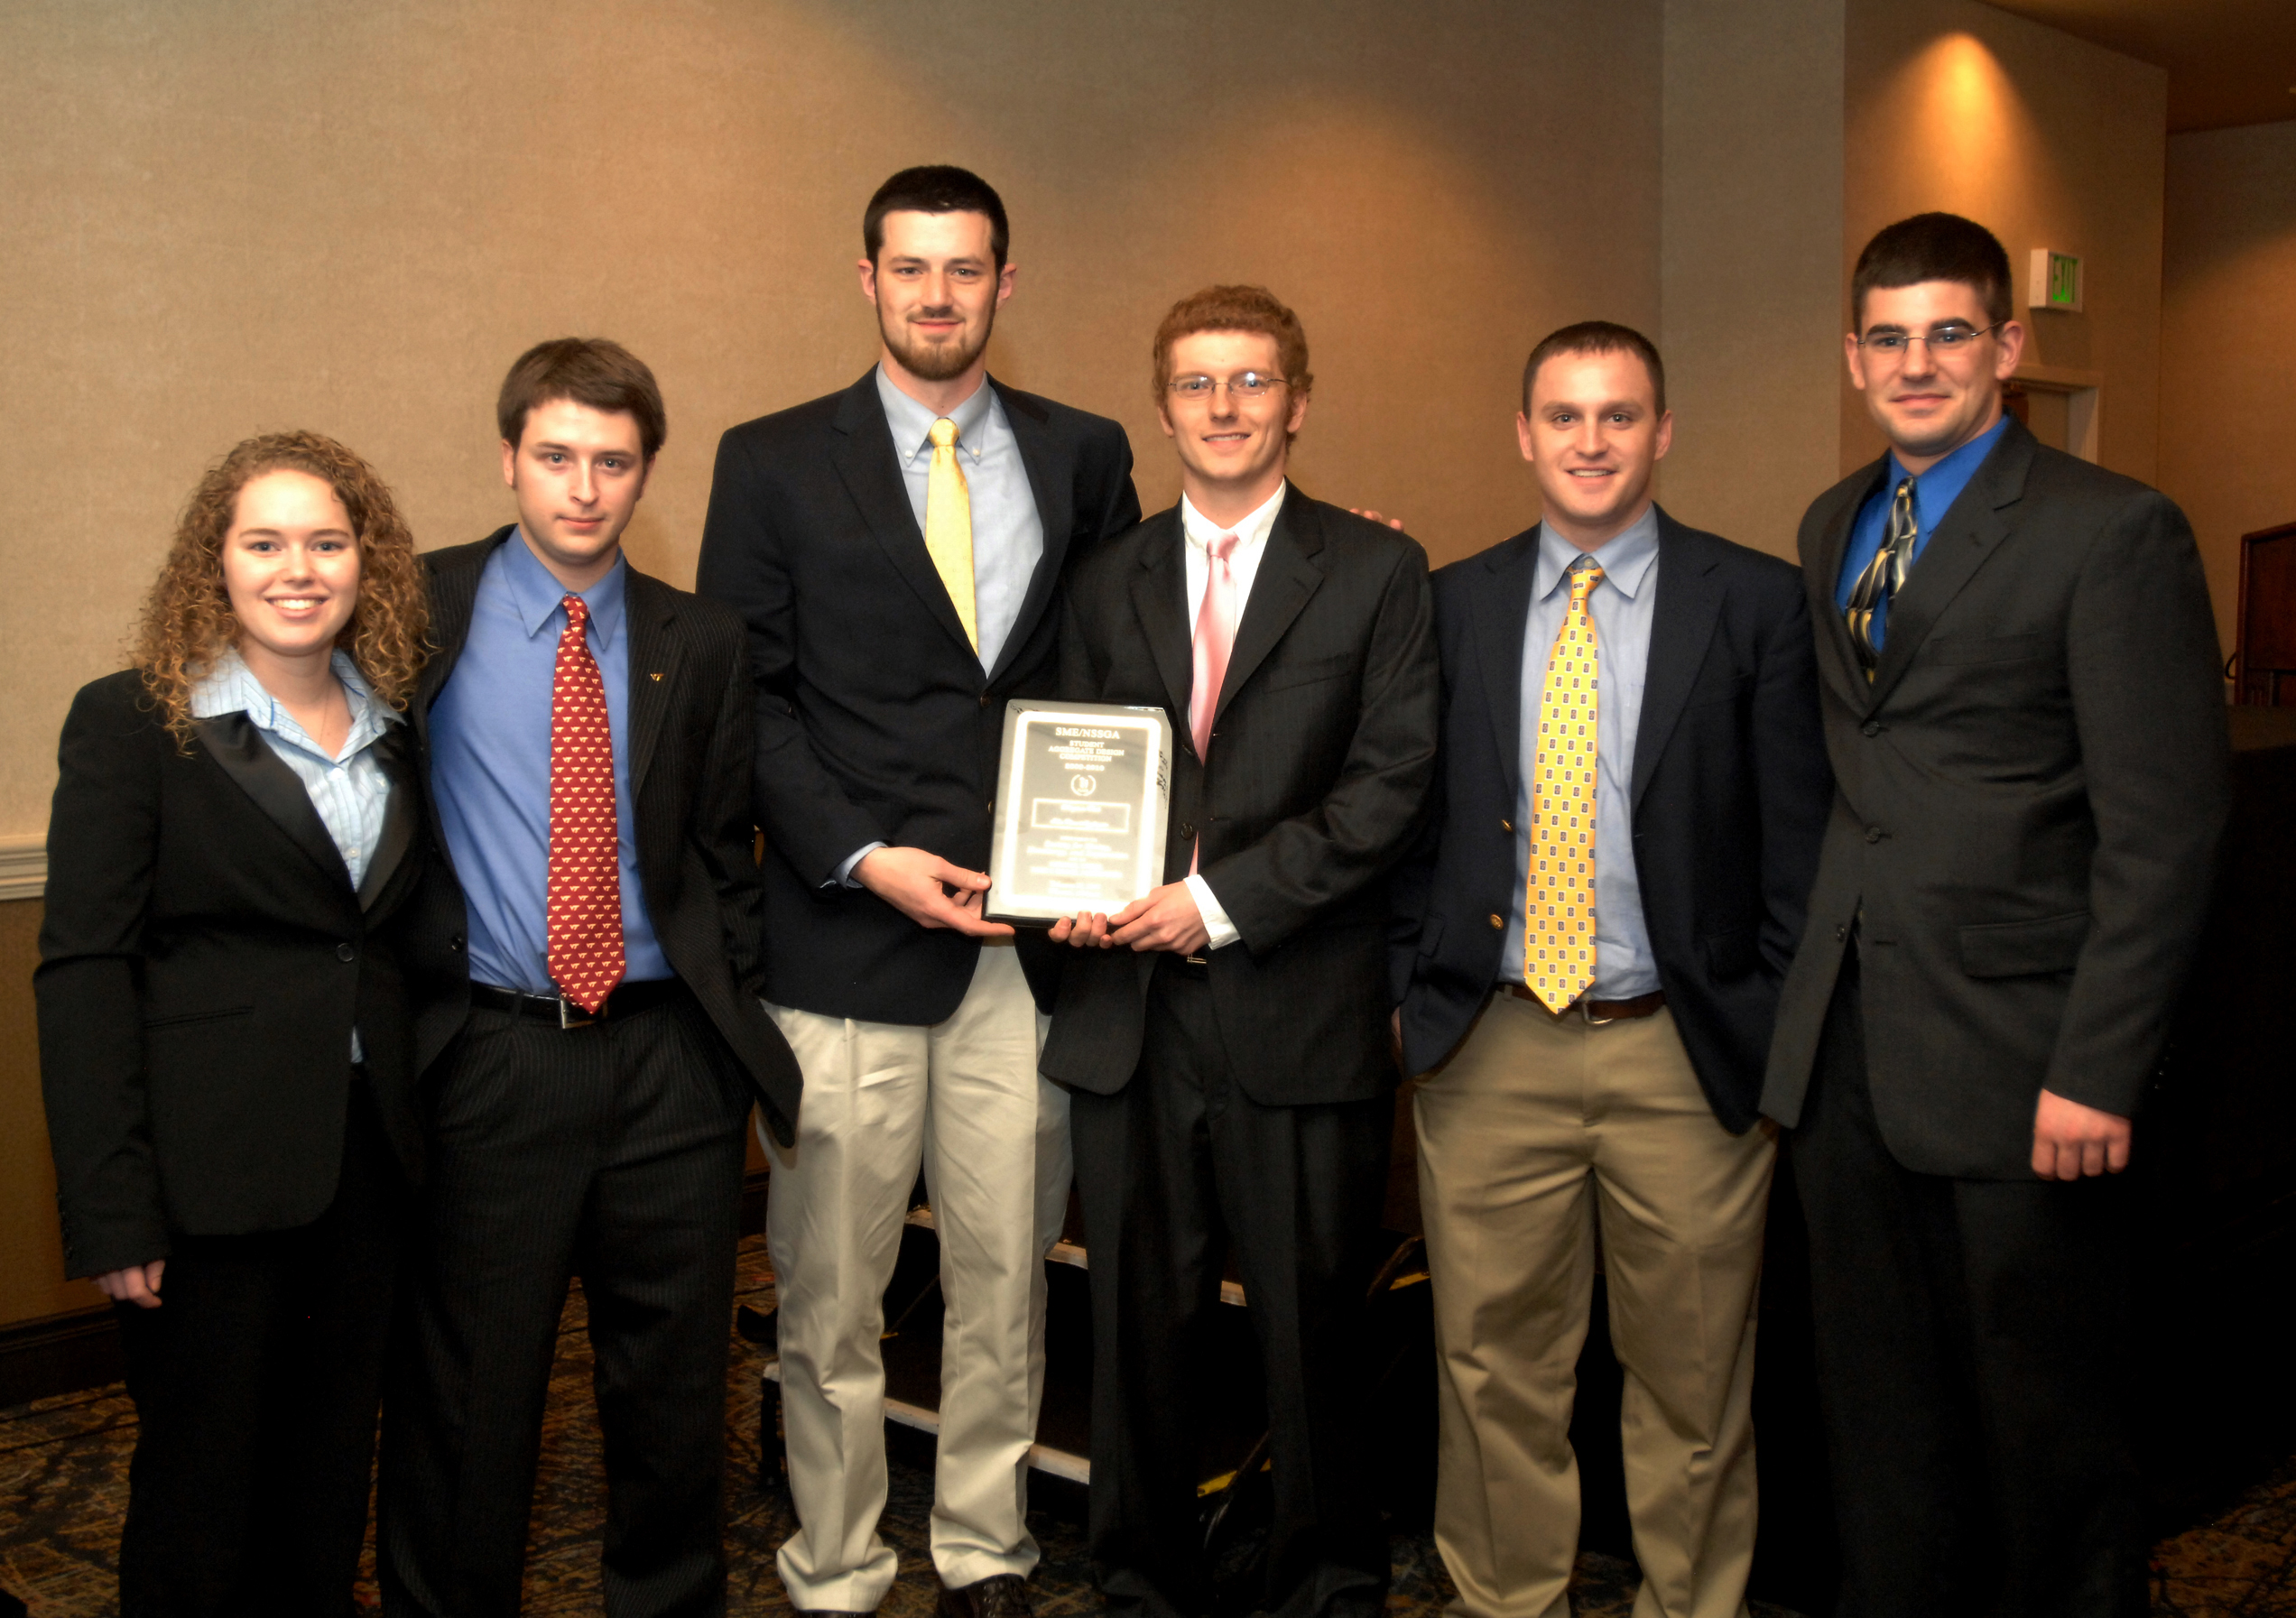 Members of New River Aggregates are pictured with their top prize in this year's SME/NSSGA Student Design Competition. Left to right are: Susie Underwood, Scott Hutchins, Ben Fahrman, Blane Bowers, Ricky Rose and Dan Sadtler.